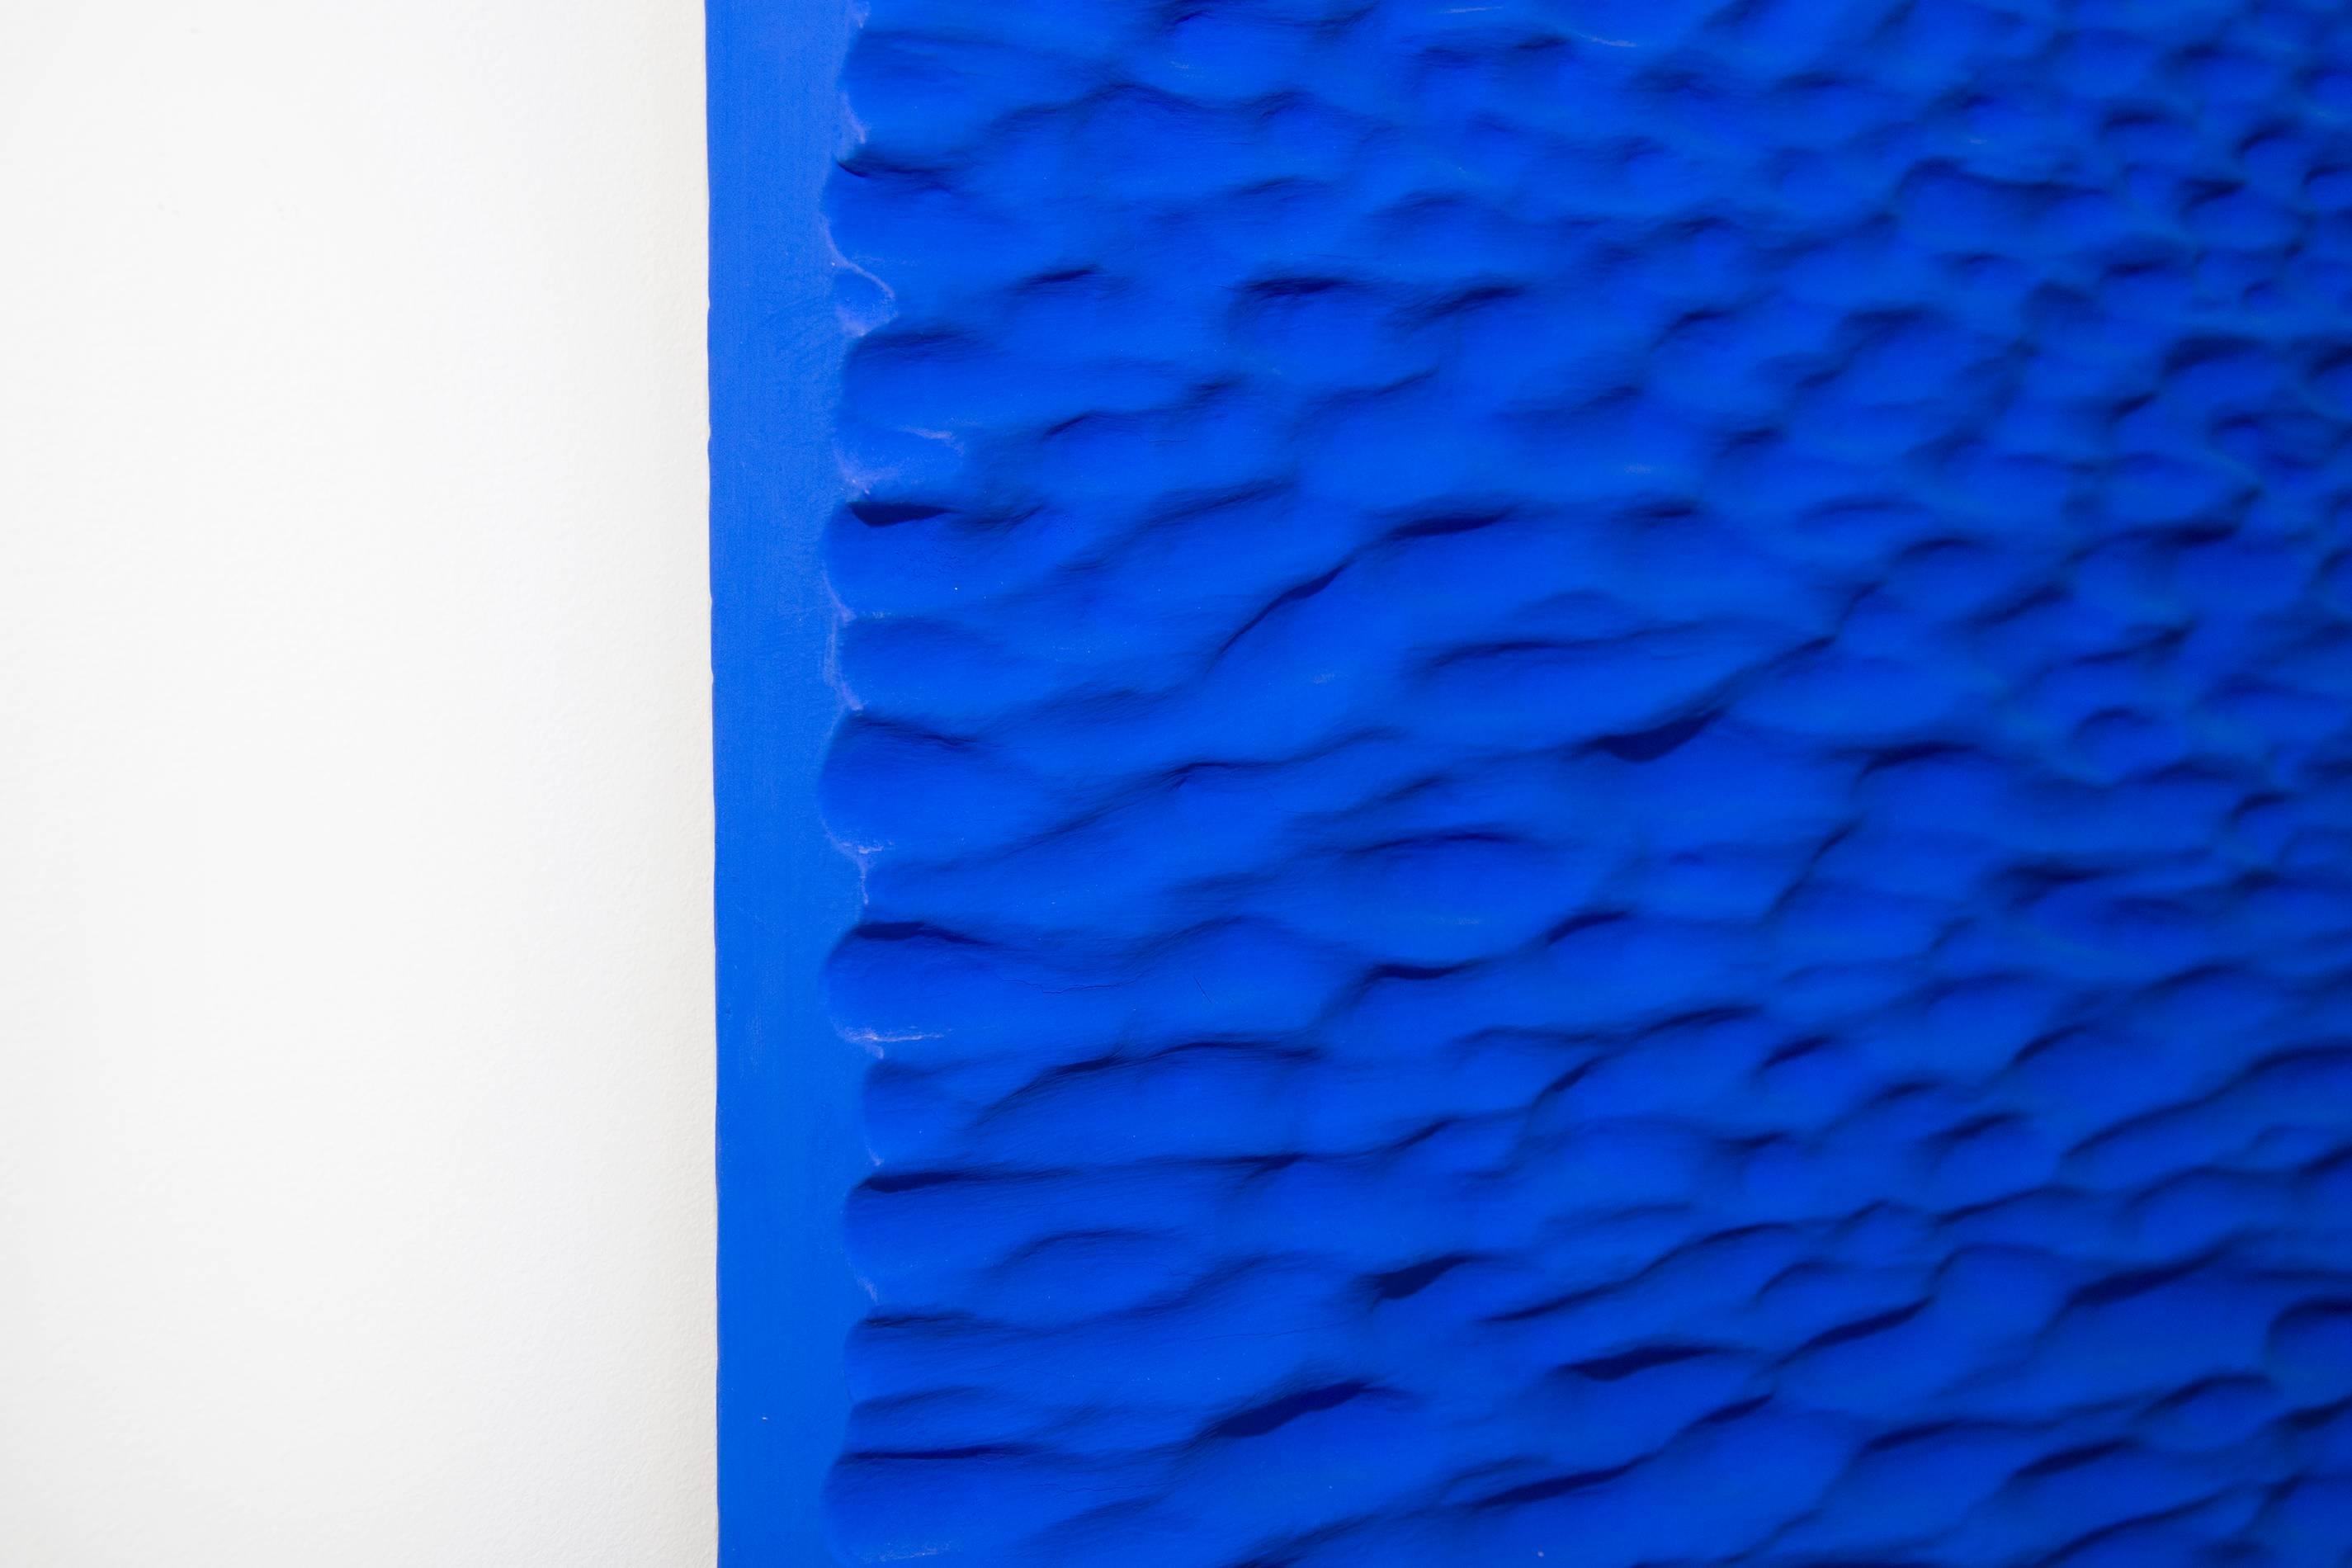 Sculpted from micro laminated wood beam in bas-relief. Inspired by the surface of water this saturated matte blue finish emulates rolling waves. 

Since he began his artistic career in the mid 1980’s, Dark has participated in exhibitions throughout